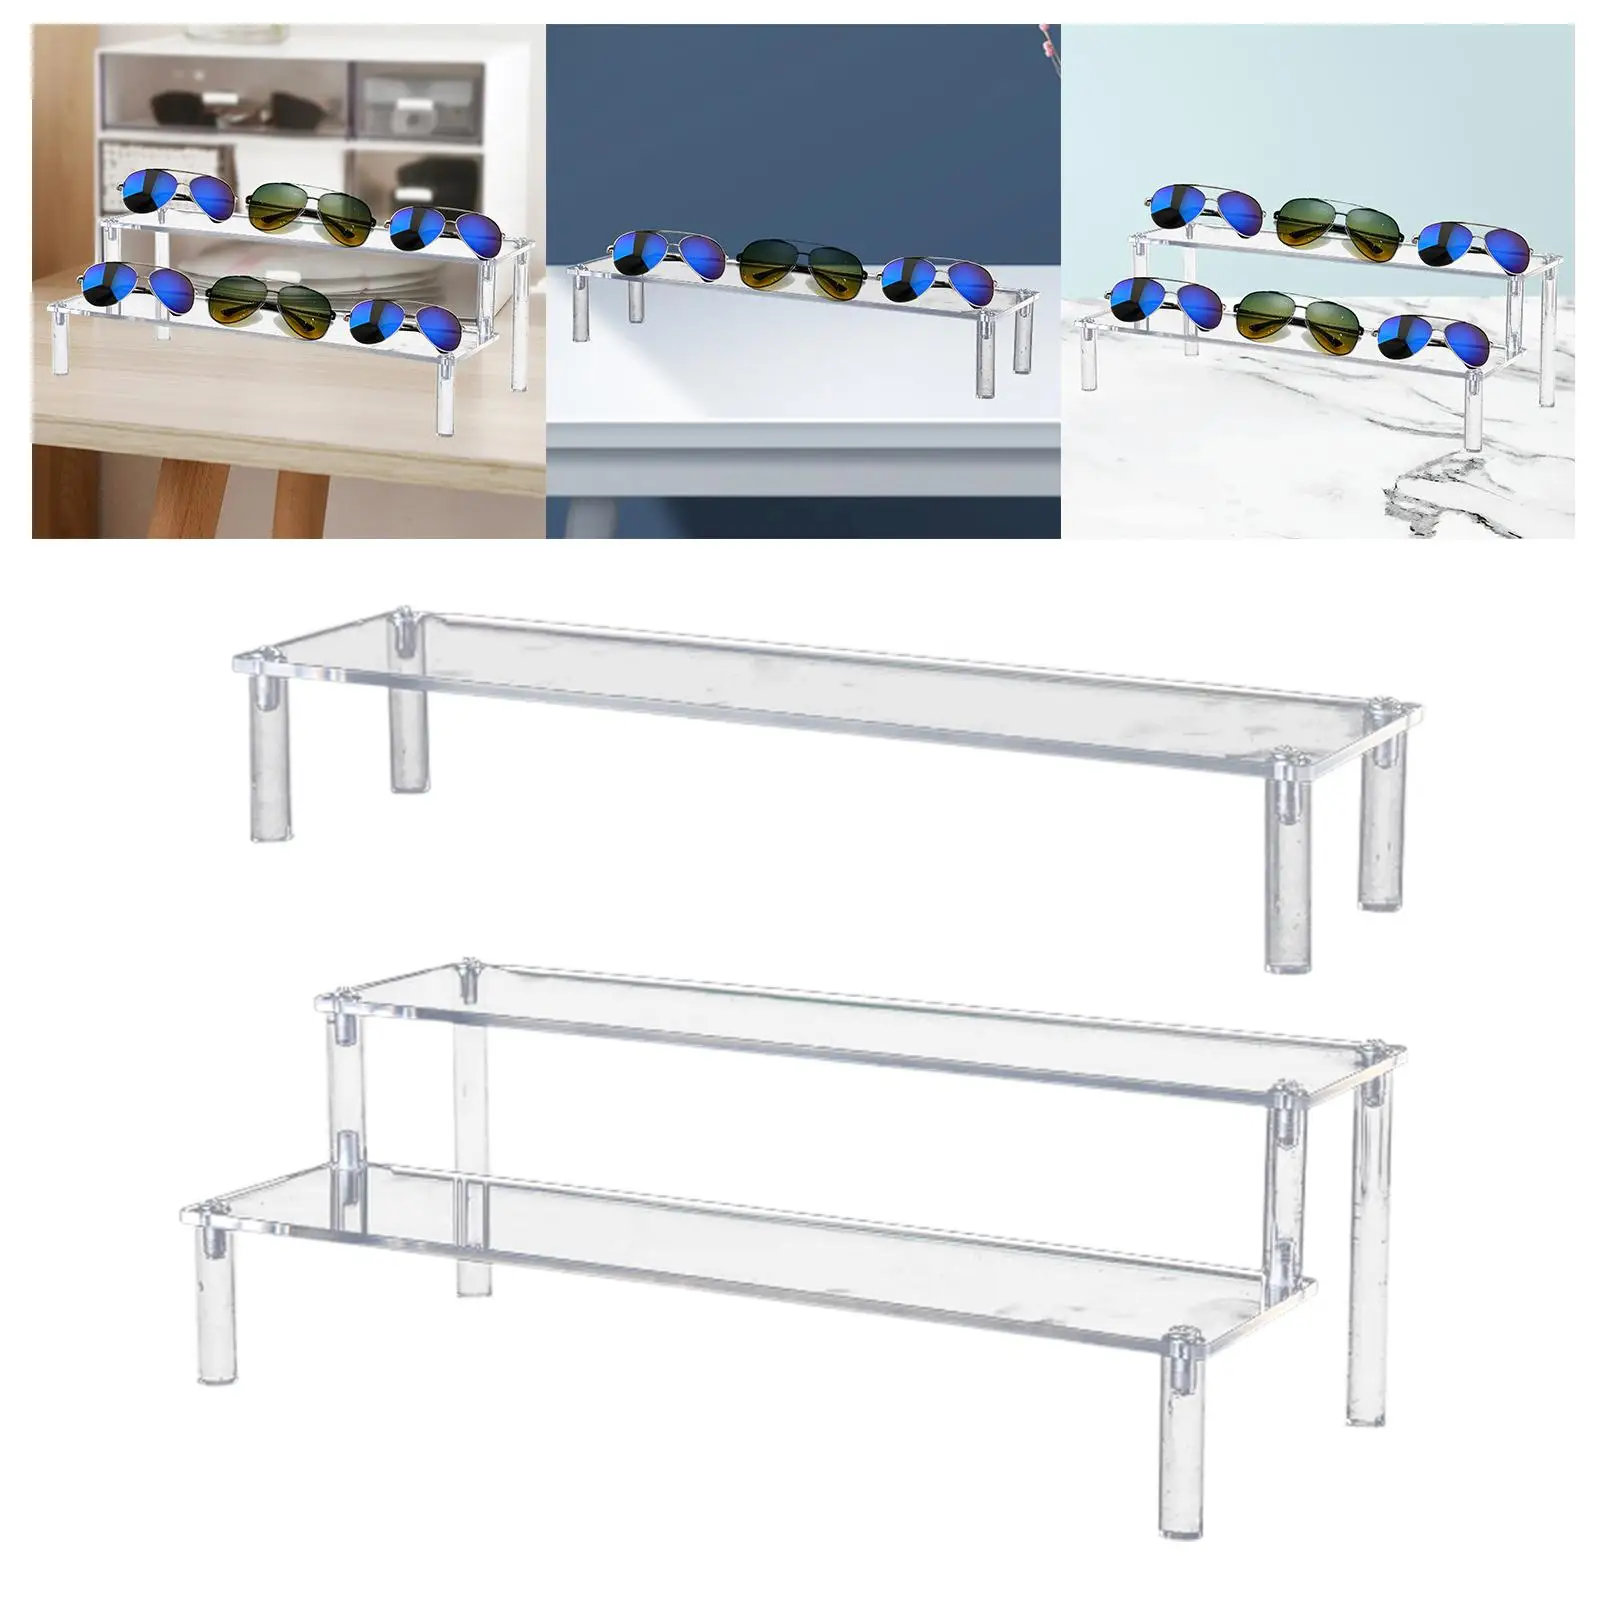 DIY Glasses Display Riser Stand Acrylic Toys Stand Organizer Space Saver